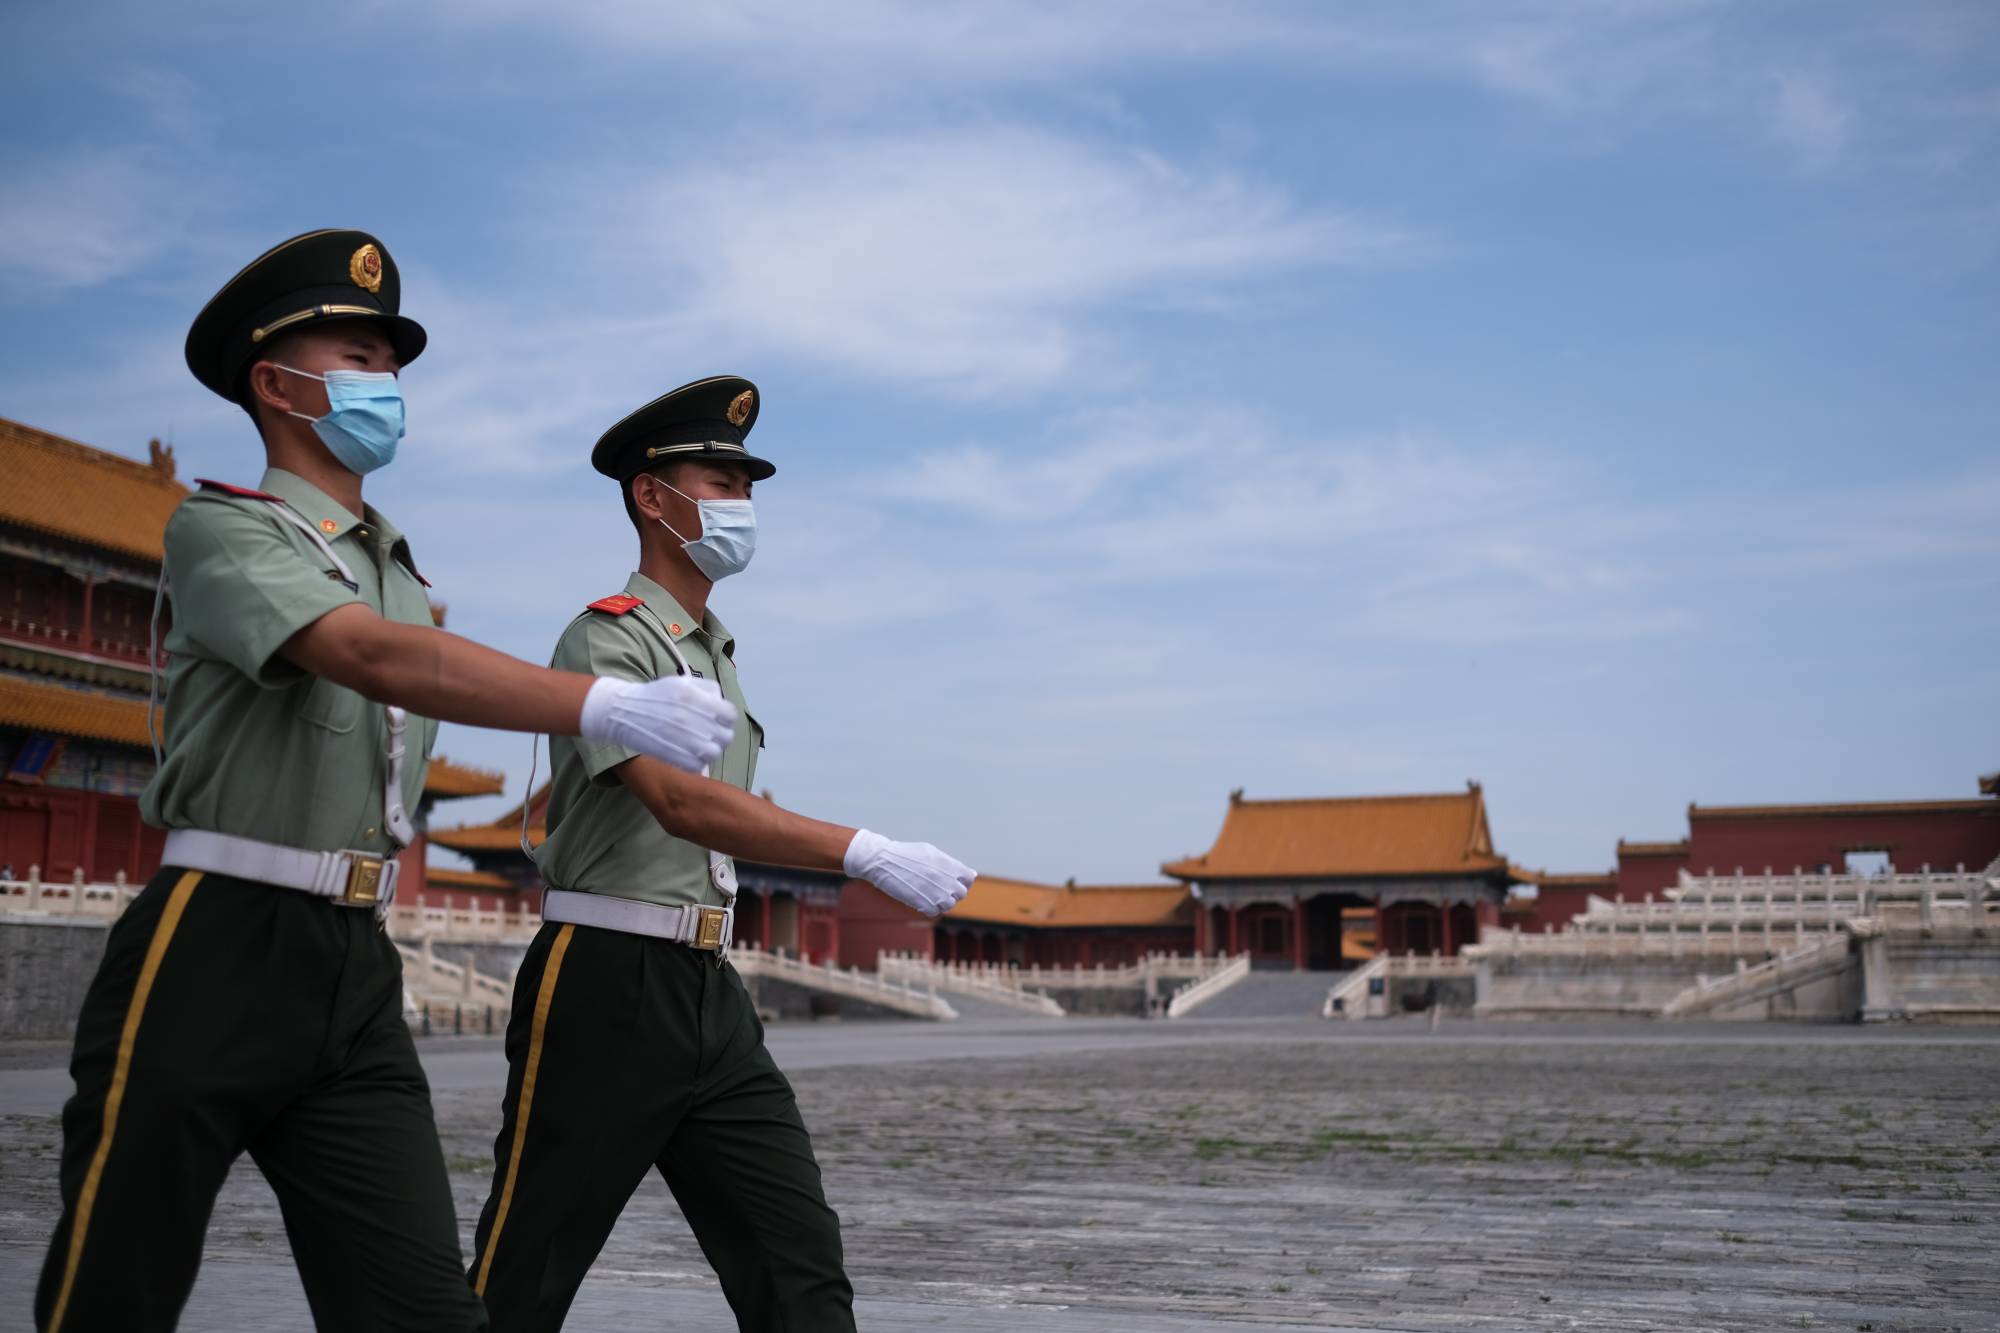 Paramilitary police officers at the Forbidden City in Beijing. An updated espionage law obligates all citizens to report on spying activities and allows authorities to inspect the belongings of suspects. | REUTERS